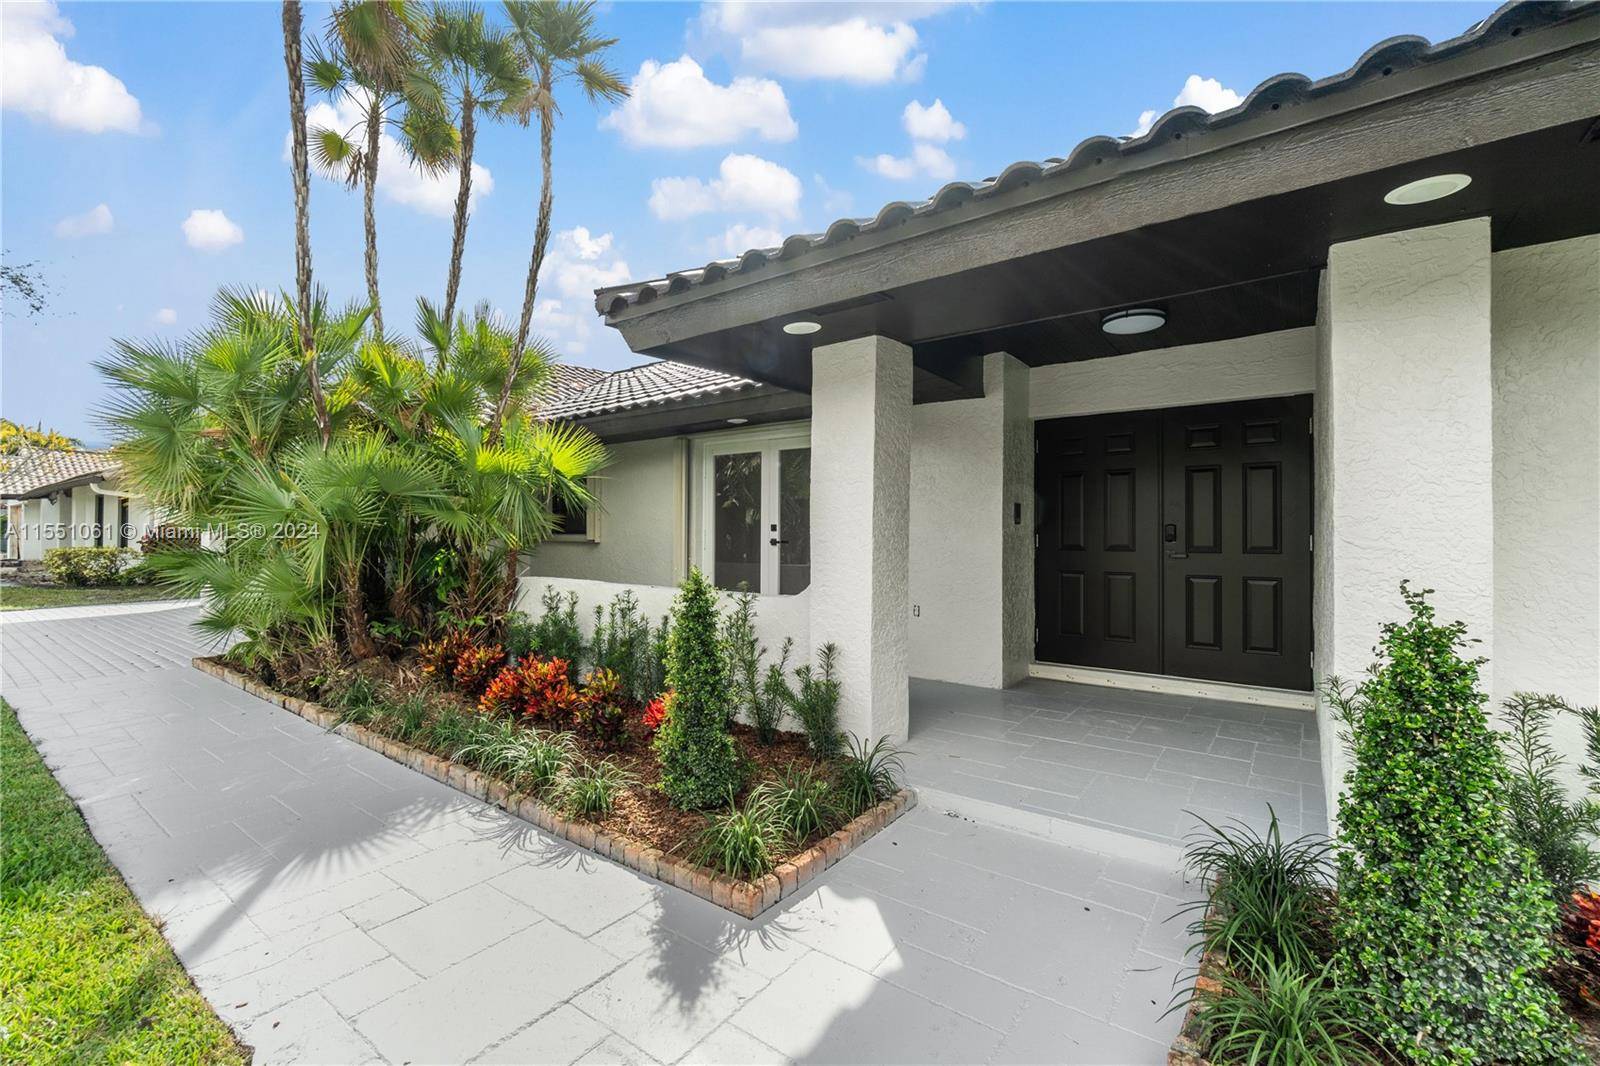 Fully upgraded Mediterranean house located in prestigious Doral Estates a very safe low density gated community, part of Doral Trump Golf Course.